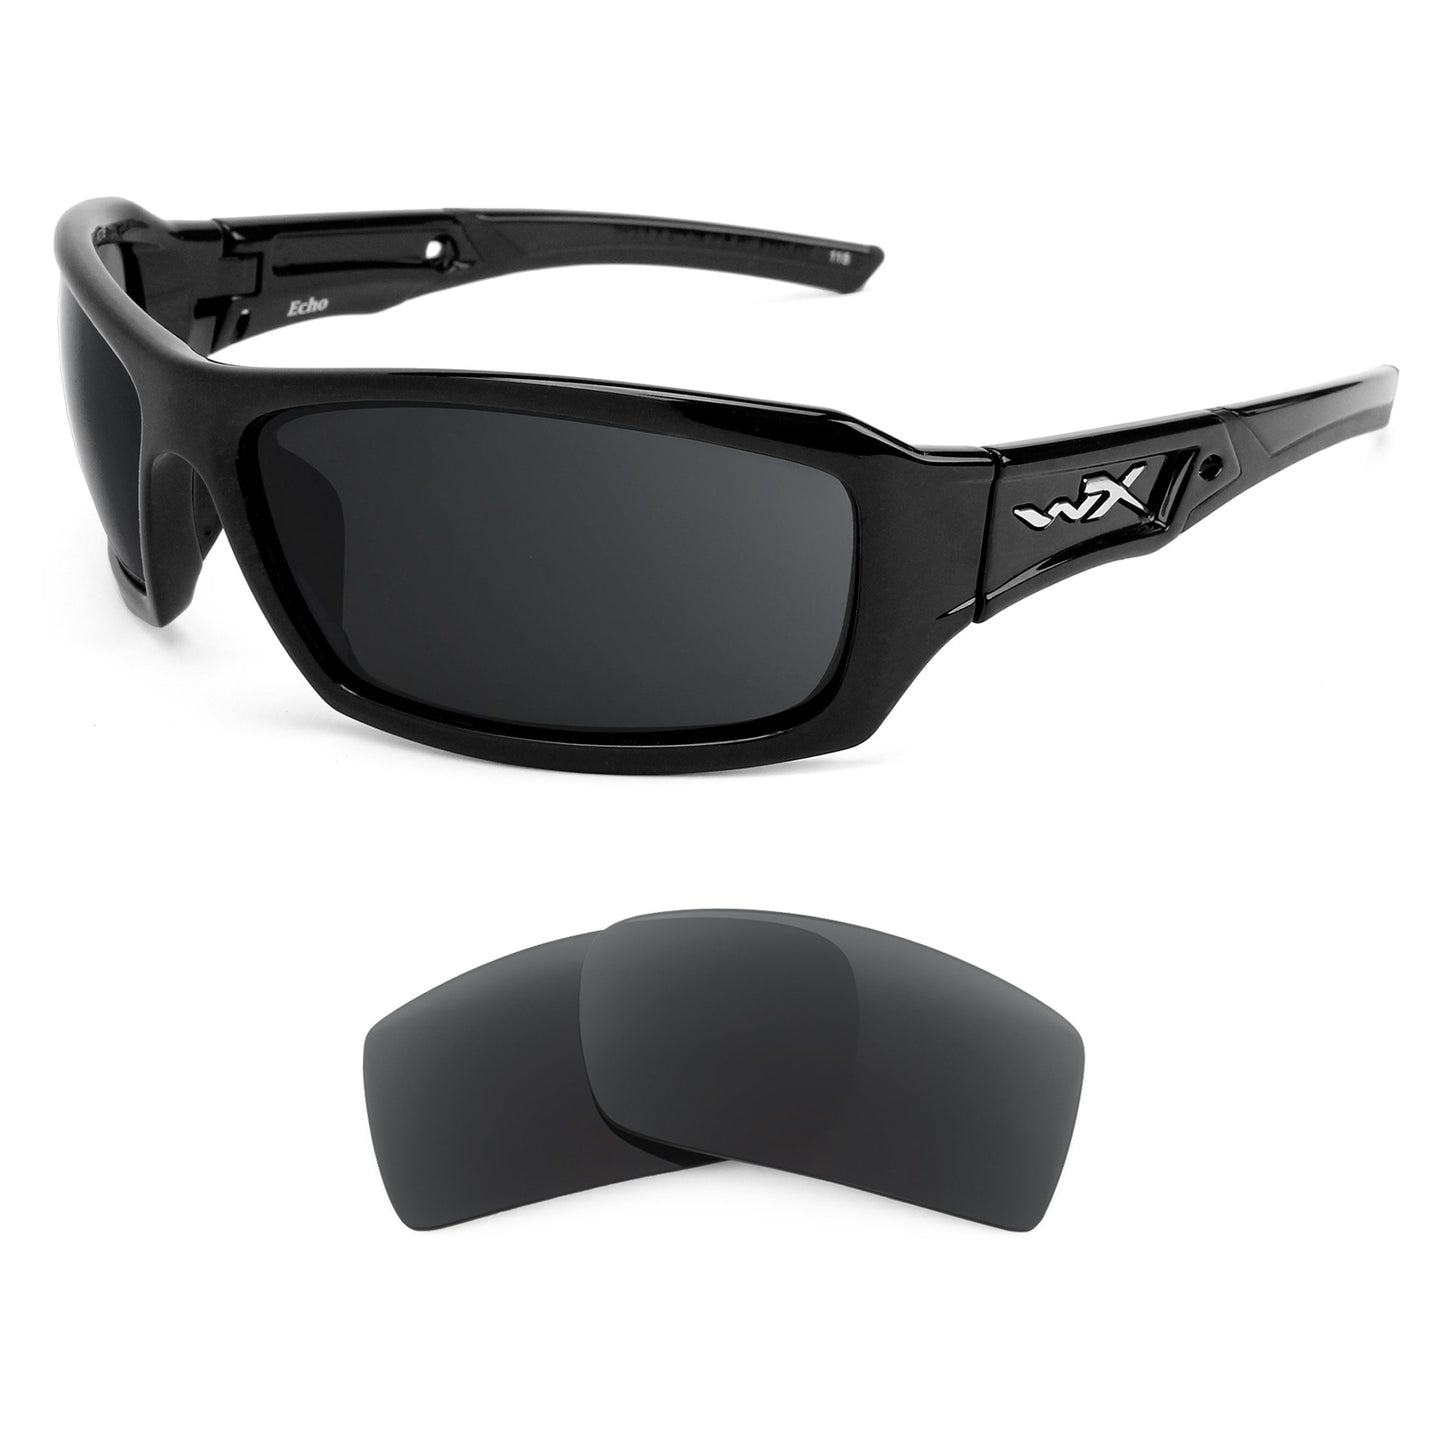 Wiley X Echo sunglasses with replacement lenses